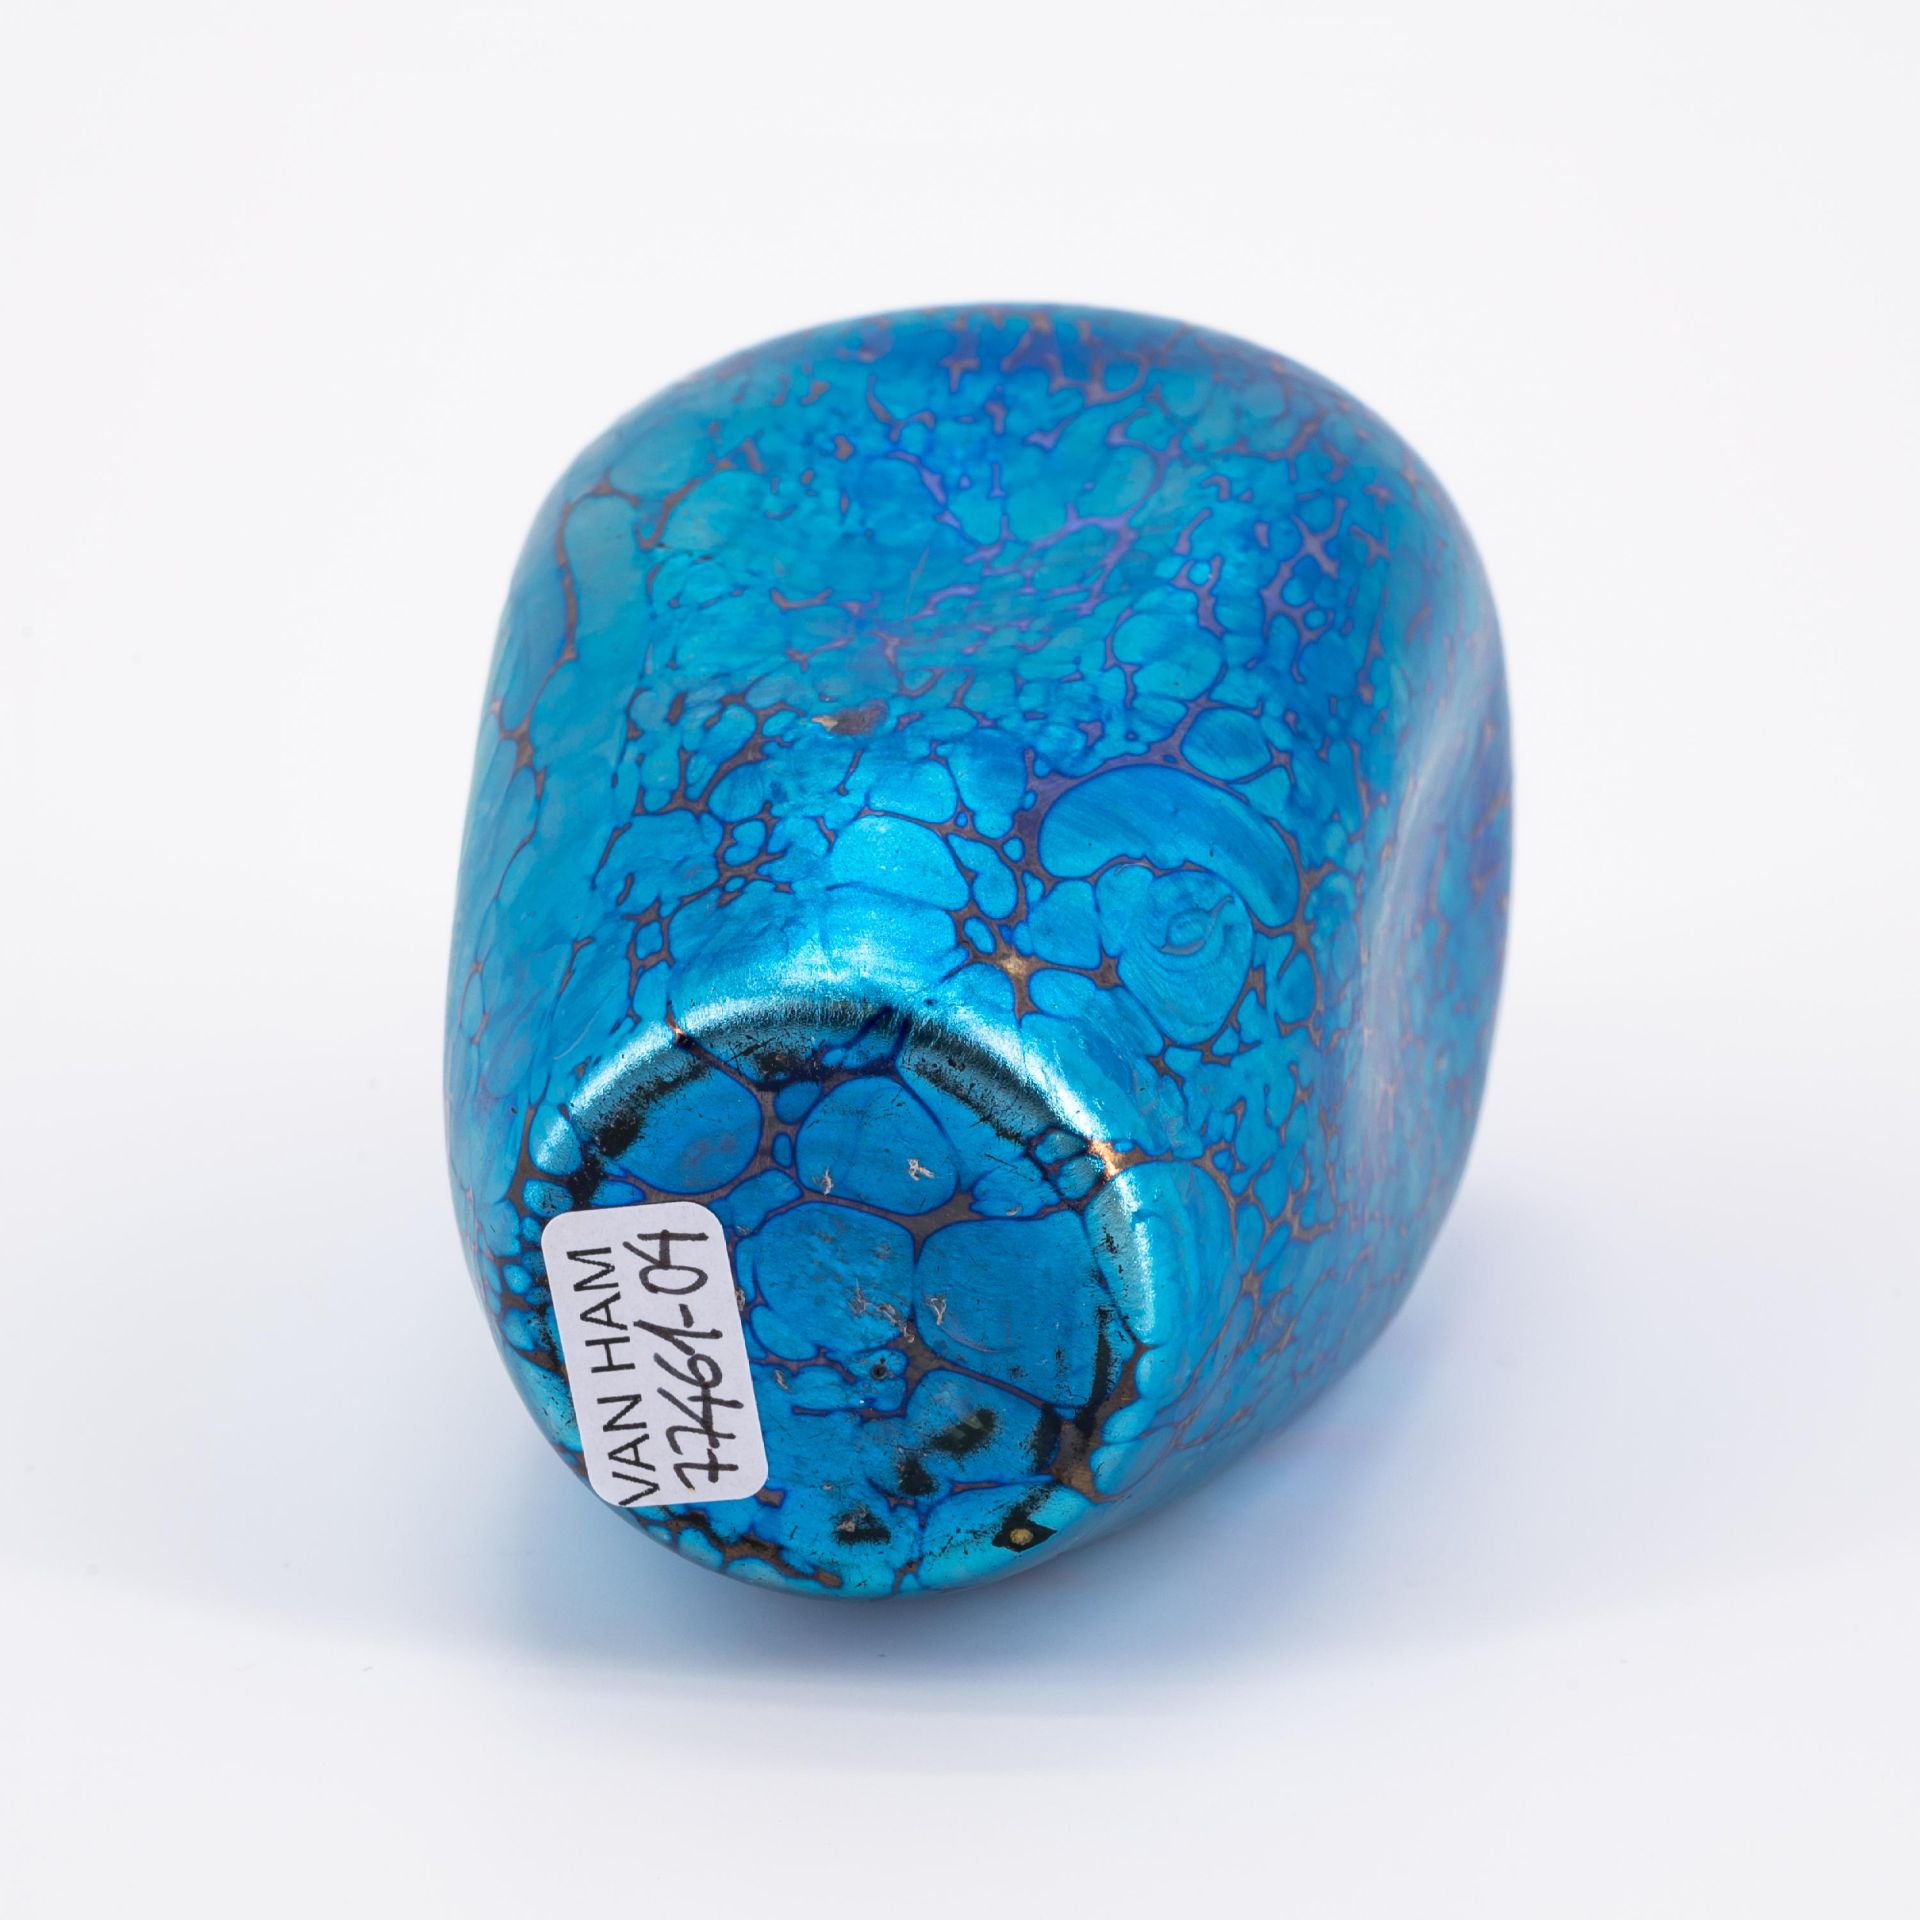 SMALL ELECTRIC-BLUE FAVRILE-GLASS VASE - Image 6 of 6